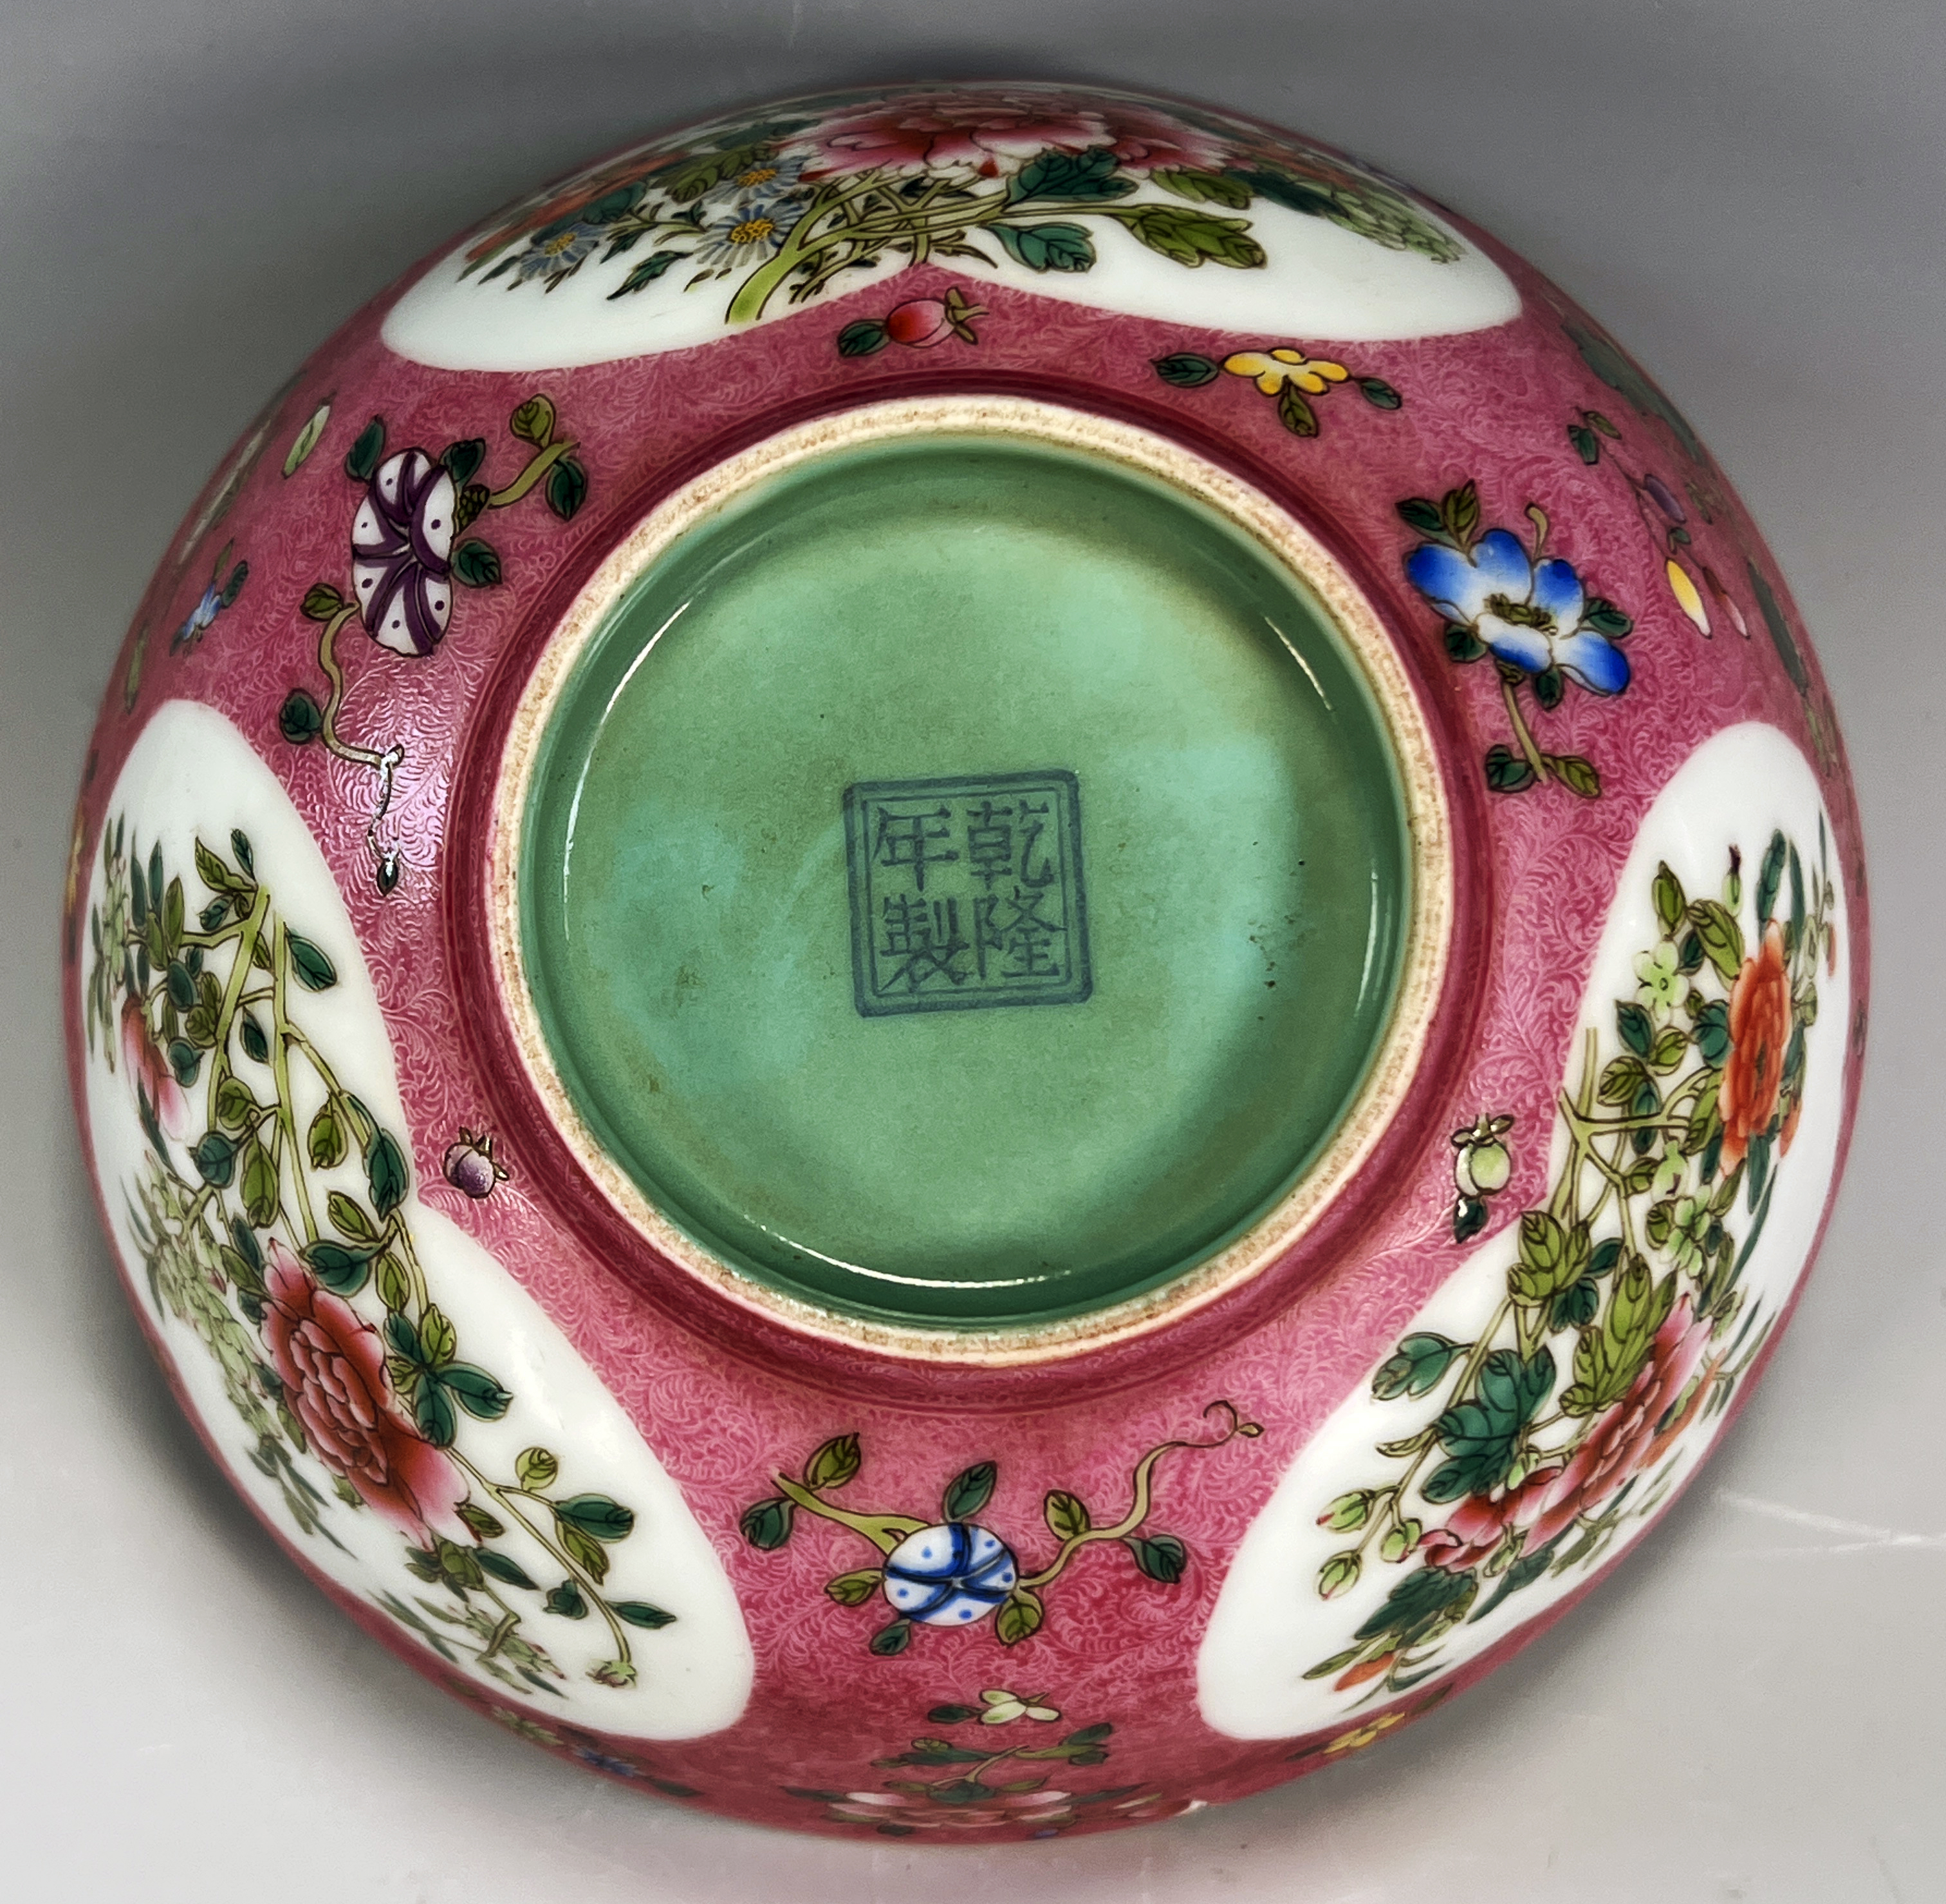 Exquisite Famille Rose Porcelain Bowl - A Chinese Treasure image 3